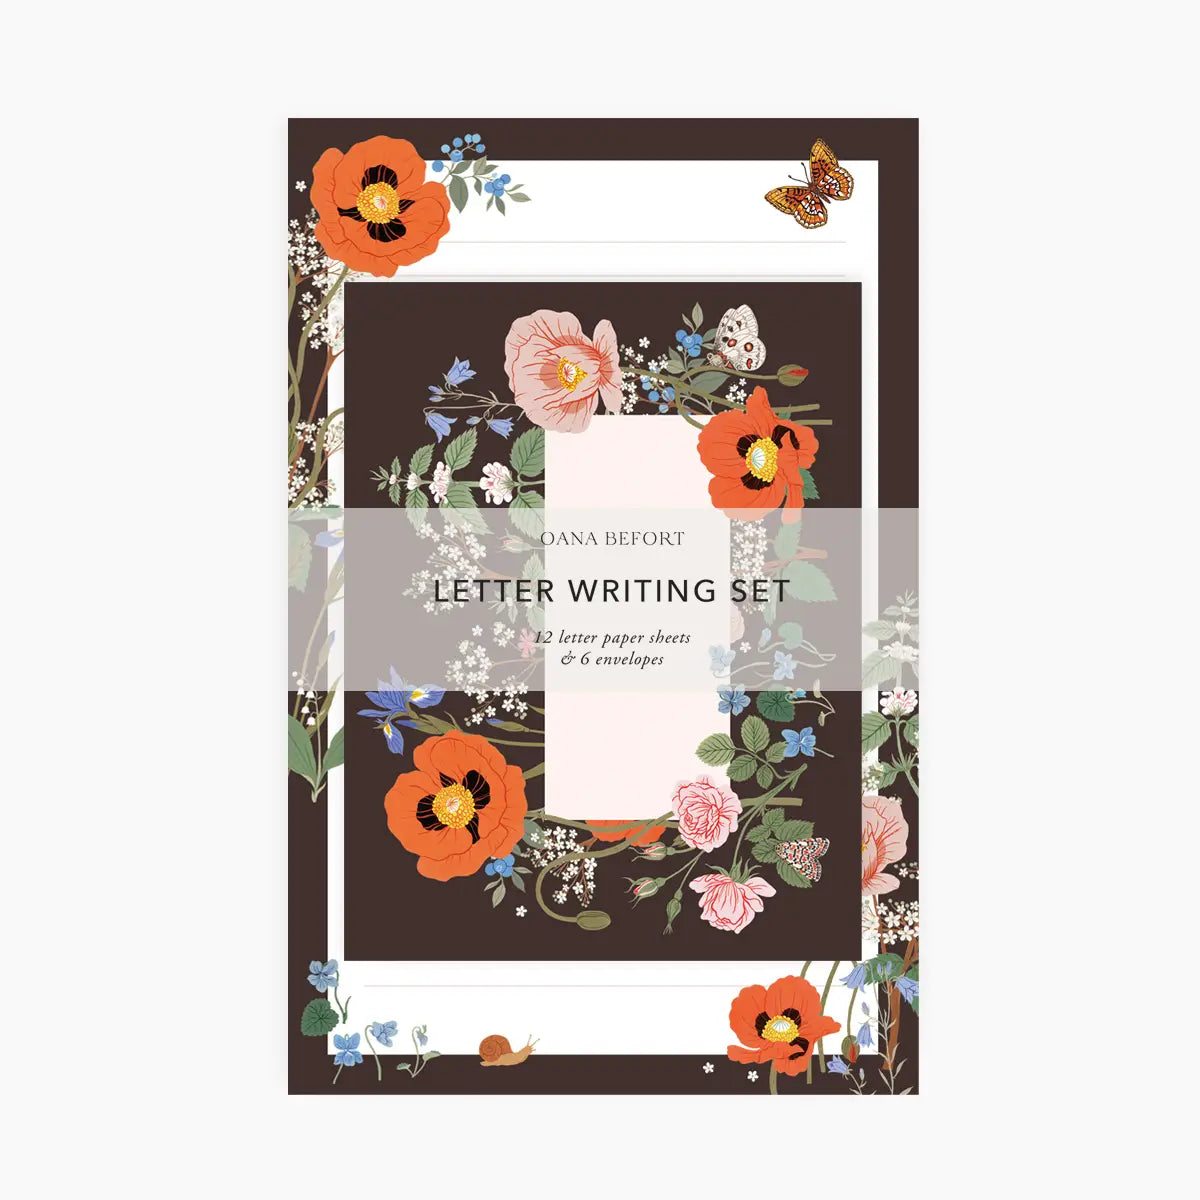 Letter writing set 'Wild flowers' by Botanica Paper co.